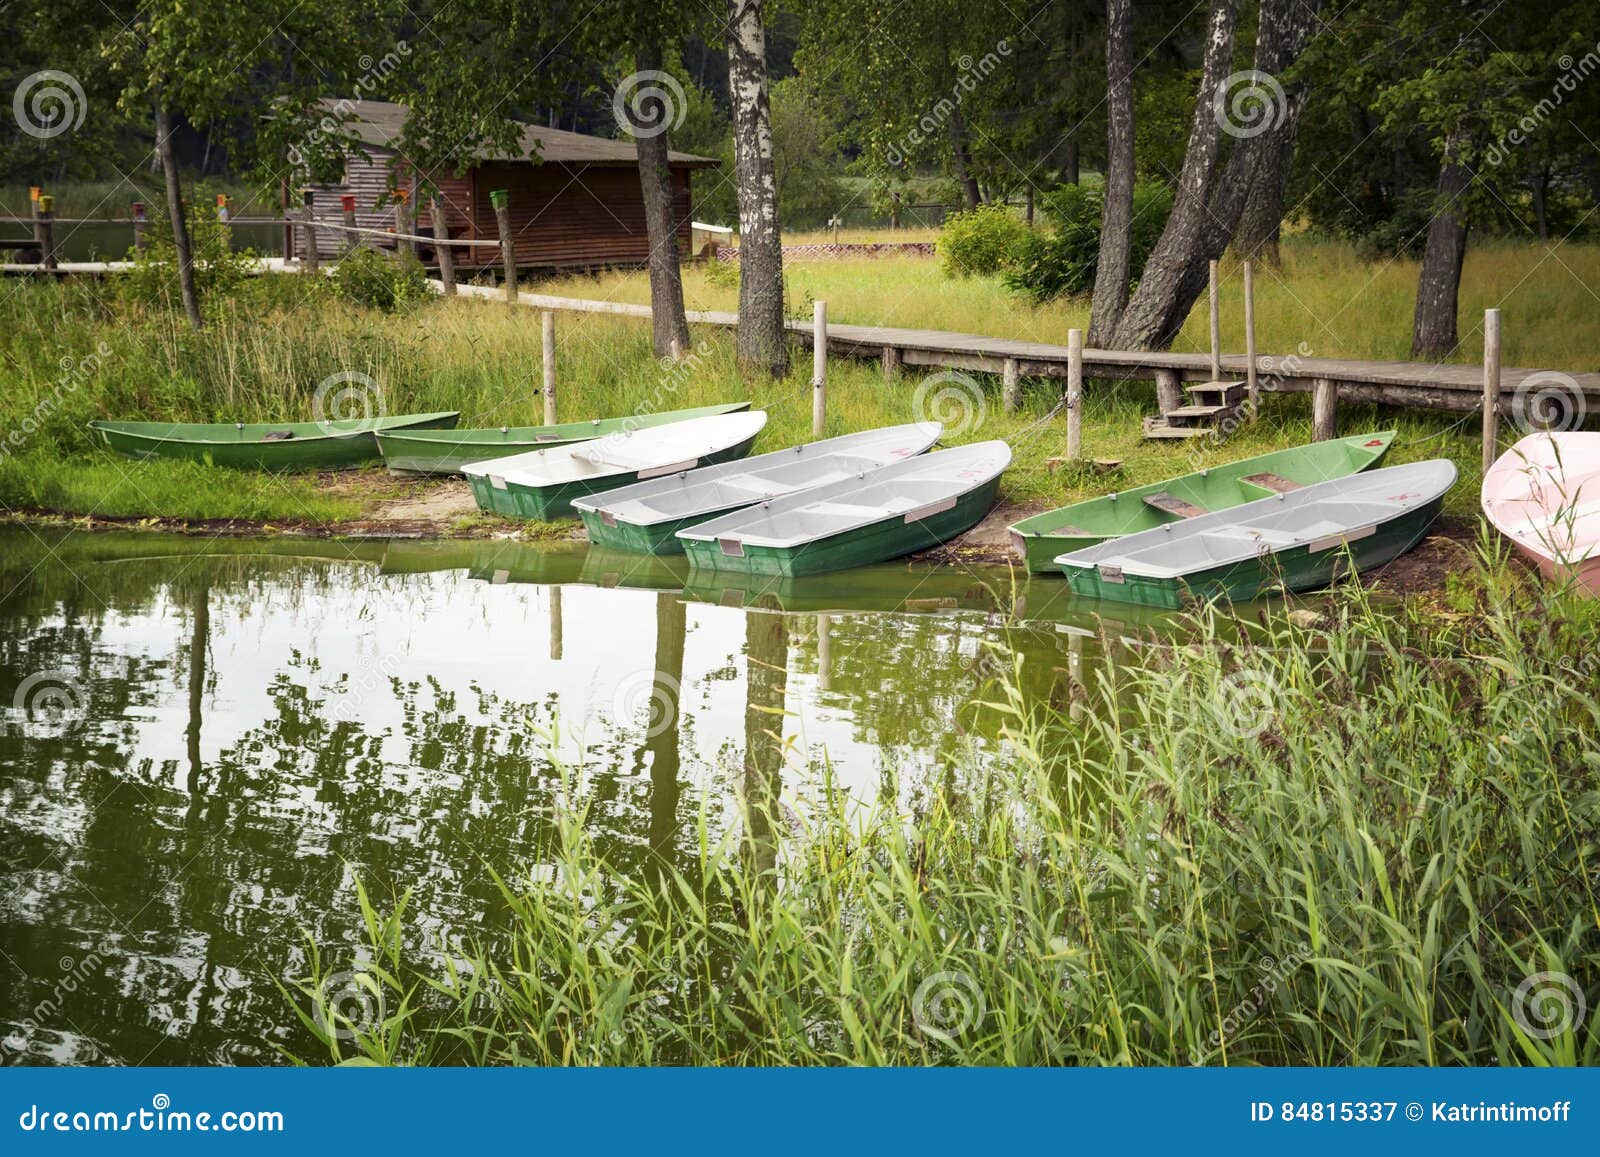 summer forest landscape with lake and boats